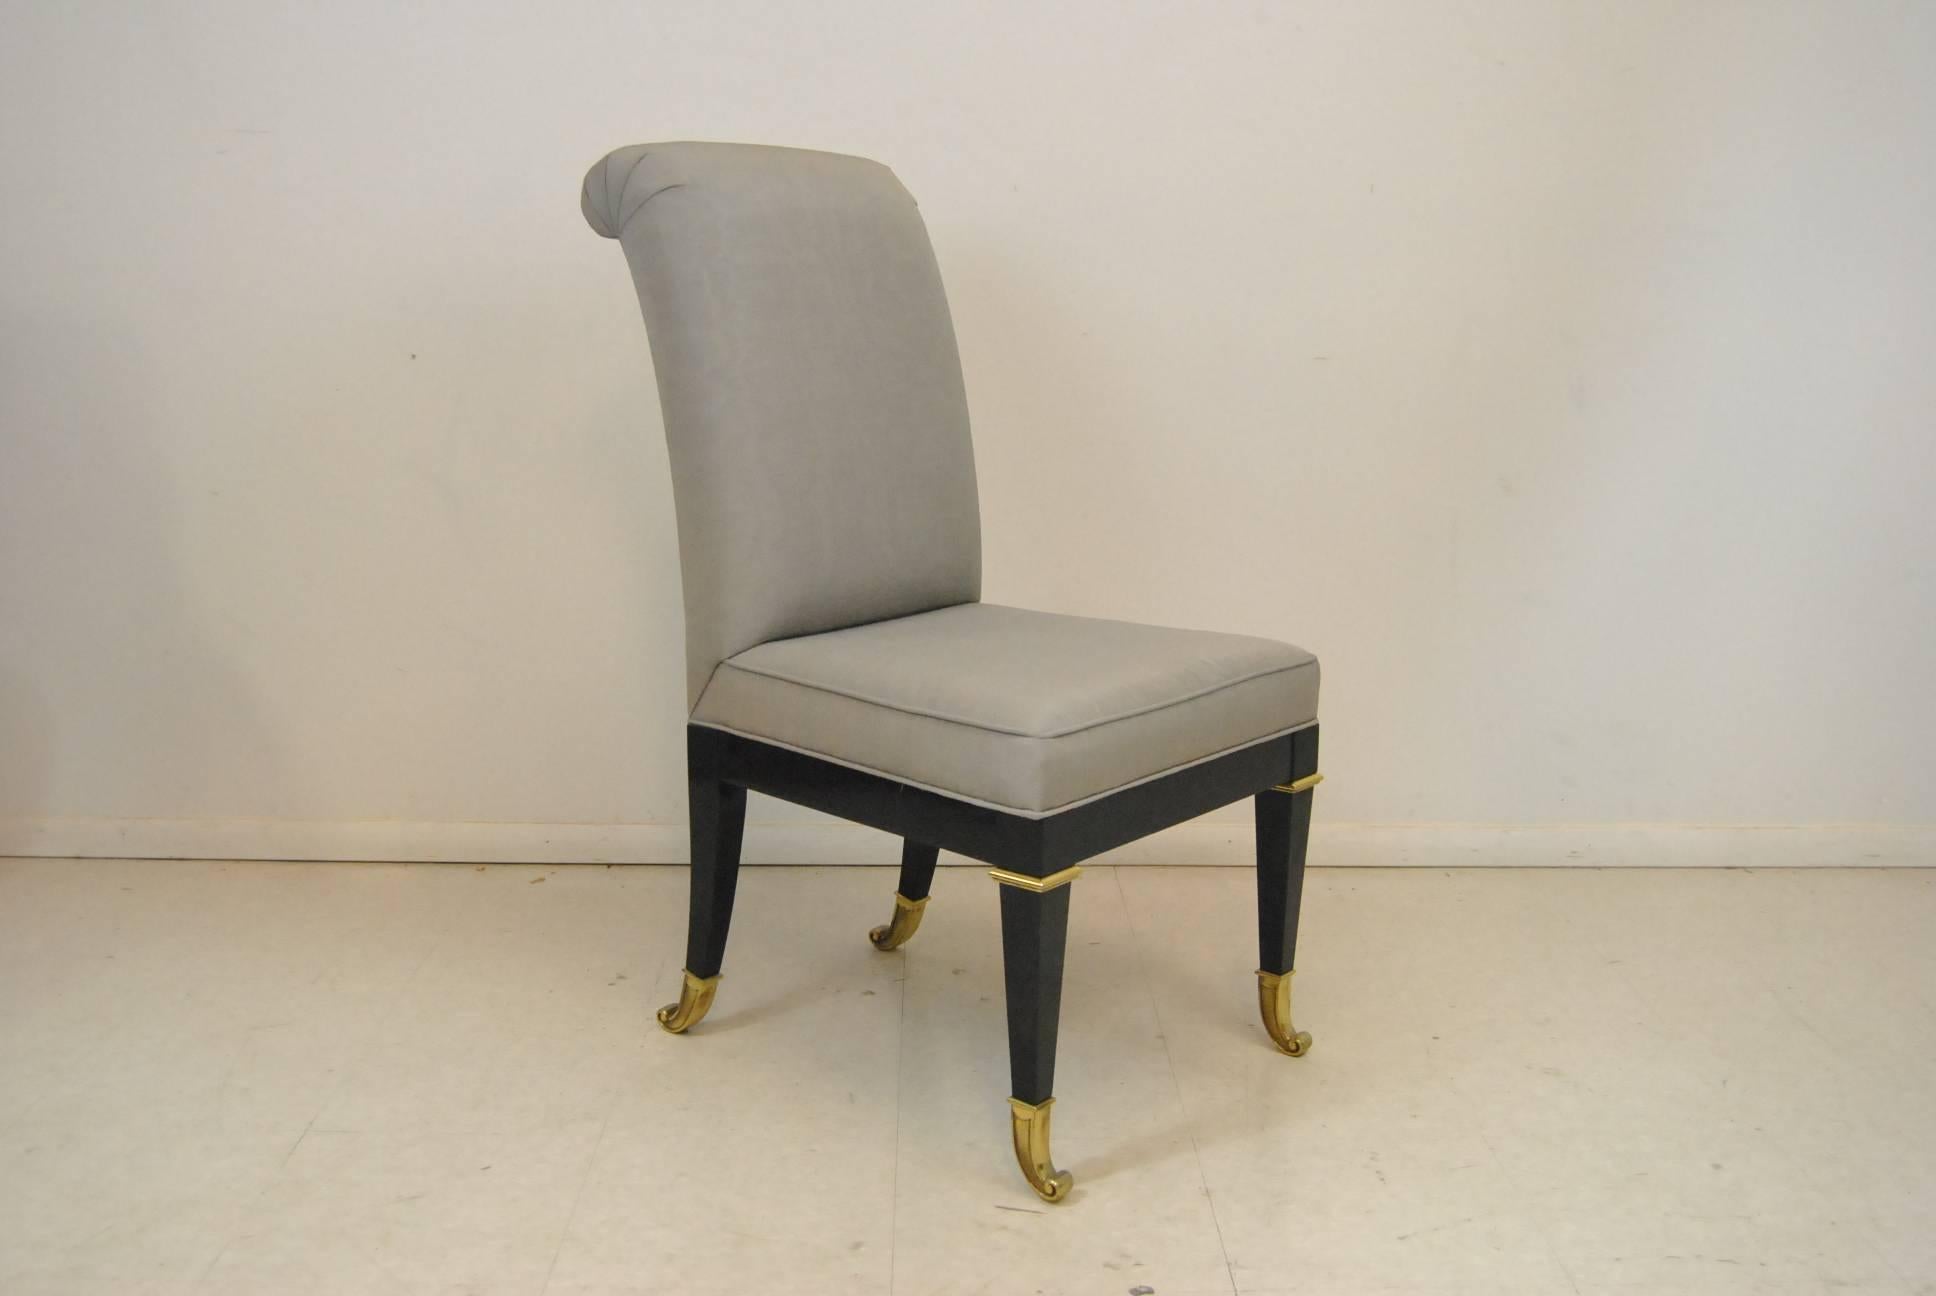 Ten Hollywood Regency style dining chairs in a Classic design from Mastercraft. Unusual brass feet and fittings. Sold as a set that includes eight side chairs and two armchairs - all with ebonized wood finish and brass feet. New upholstery is